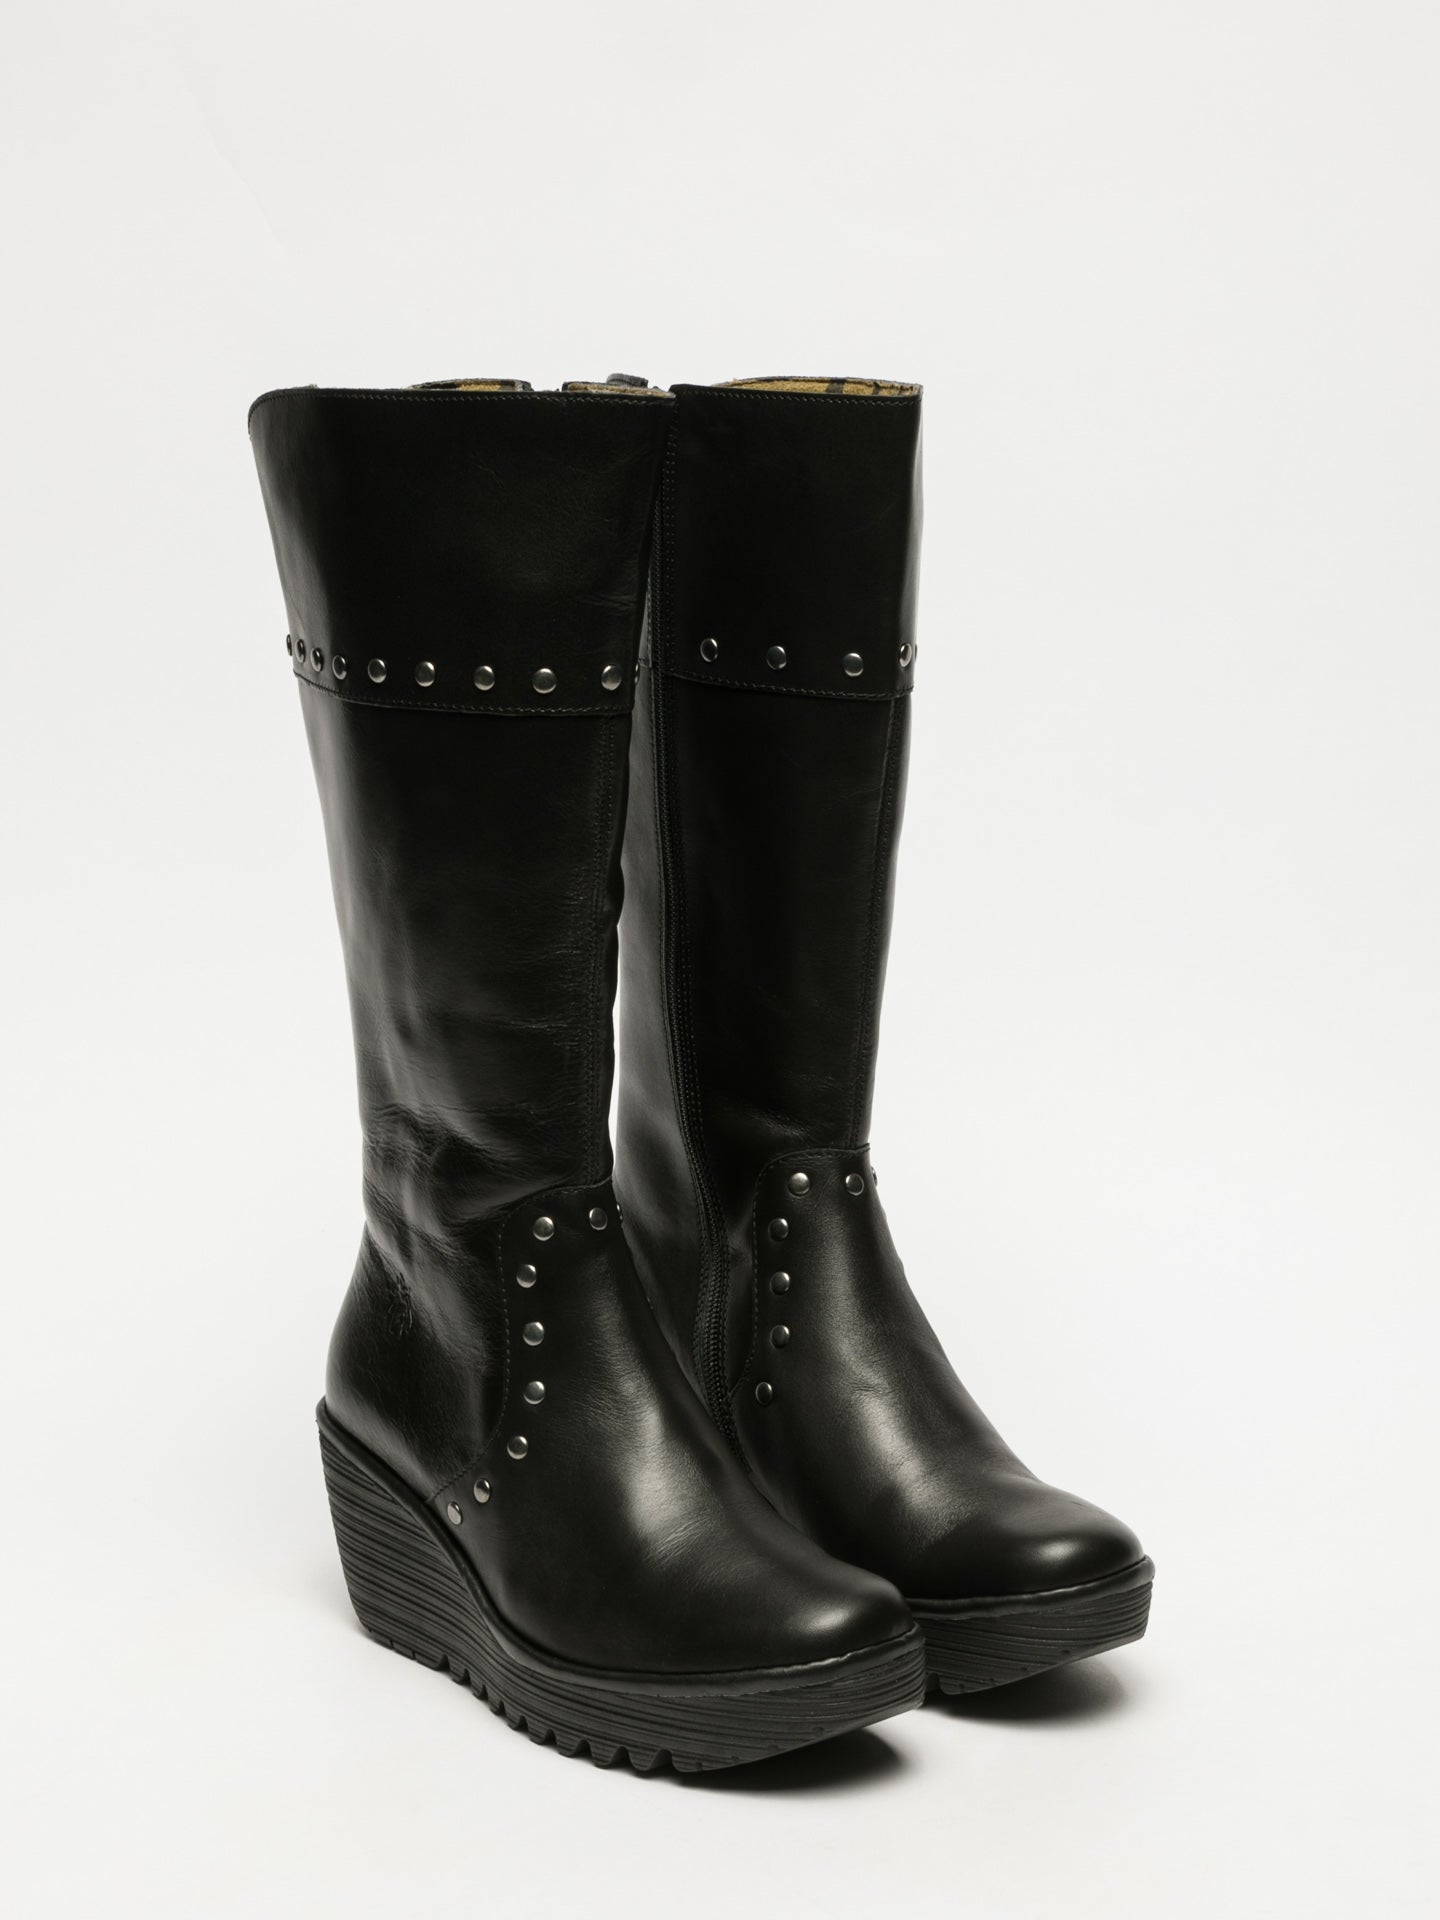 Fly London Coal Black Studded Boots